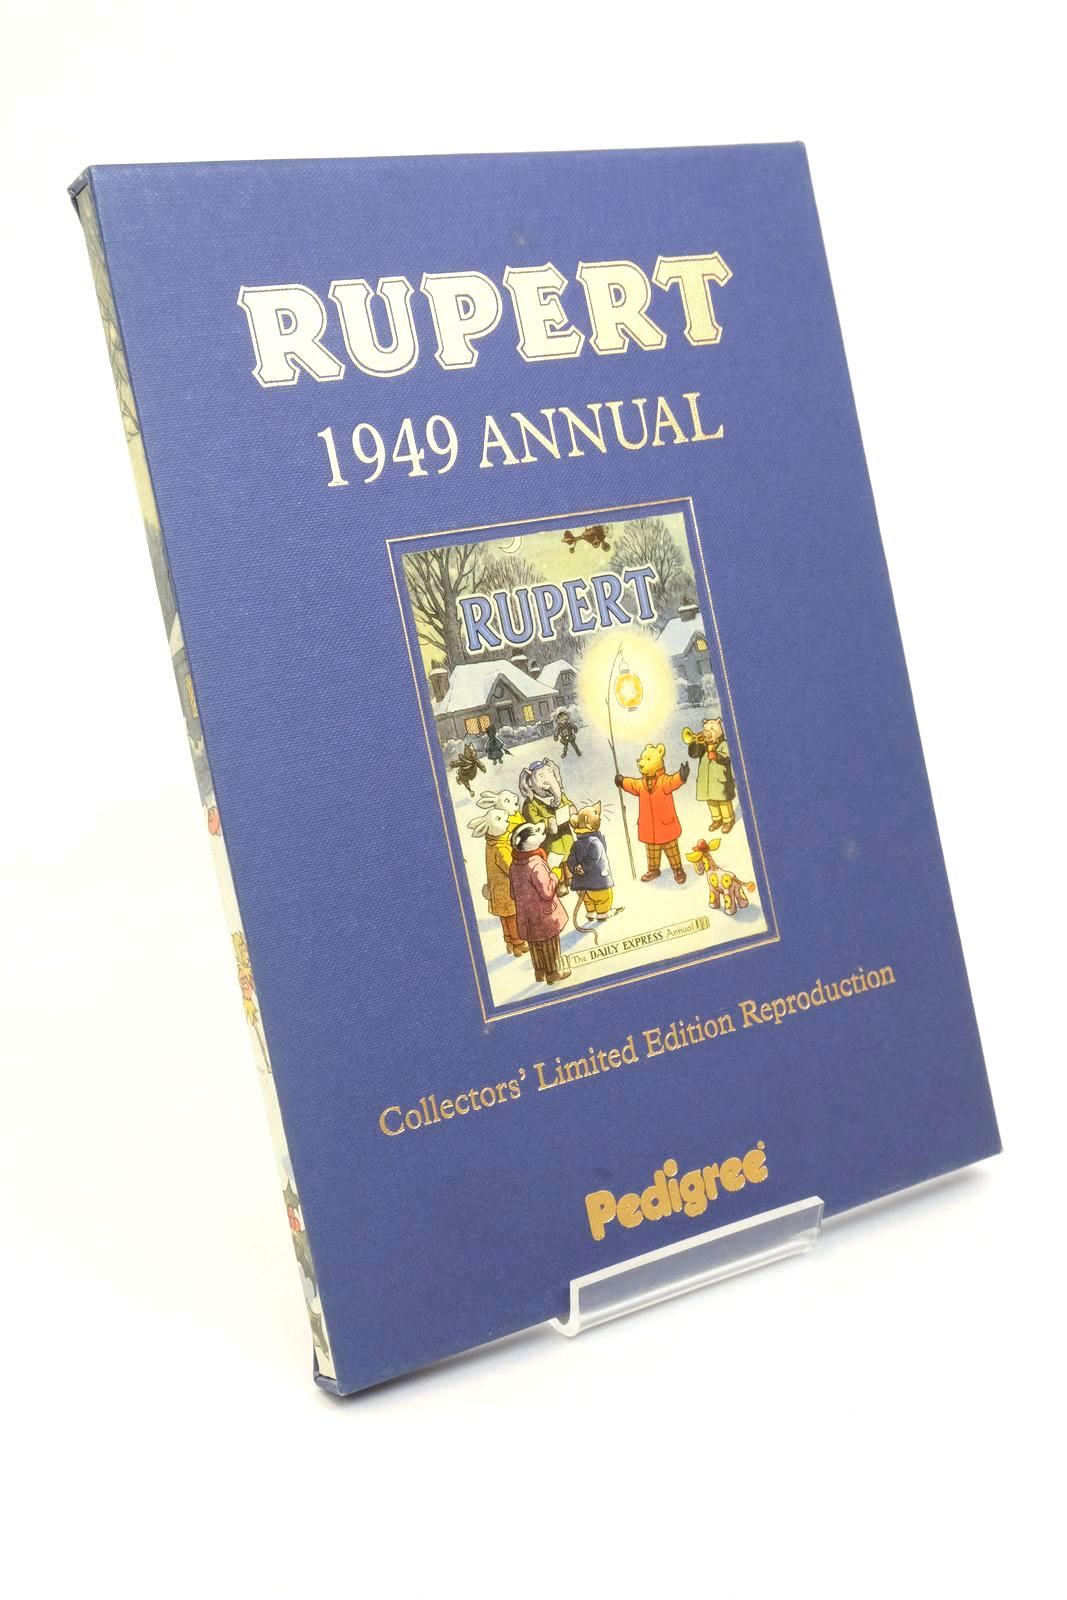 Photo of RUPERT ANNUAL 1949 (FACSIMILE) written by Bestall, Alfred illustrated by Bestall, Alfred published by Pedigree Books Limited (STOCK CODE: 1322860)  for sale by Stella & Rose's Books